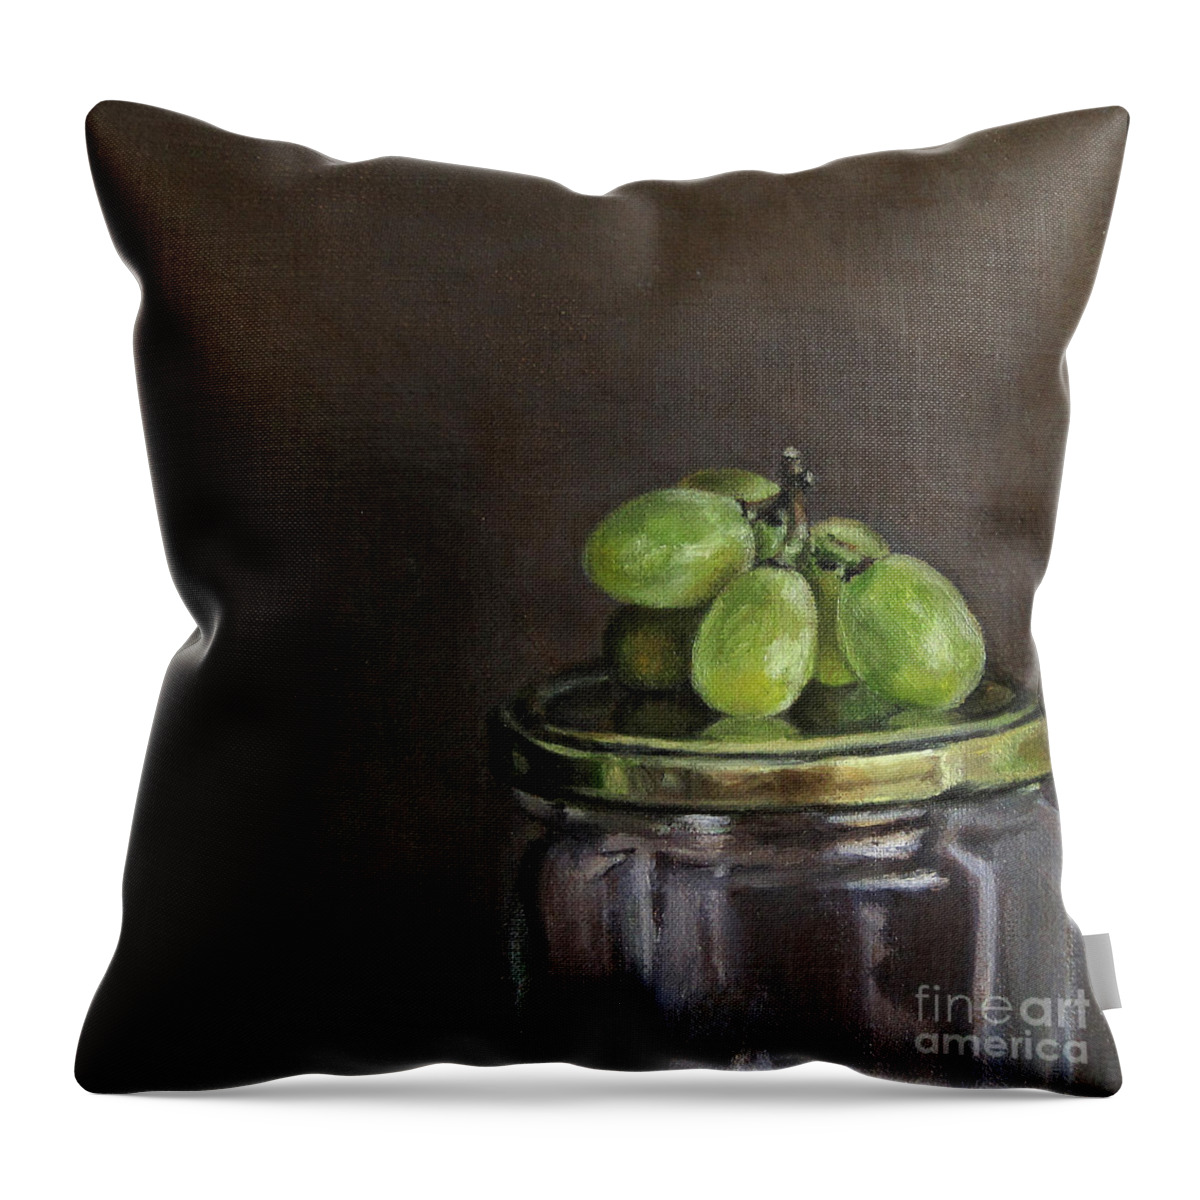 Grape Throw Pillow featuring the painting Grapes on Jar by Ulrike Miesen-Schuermann